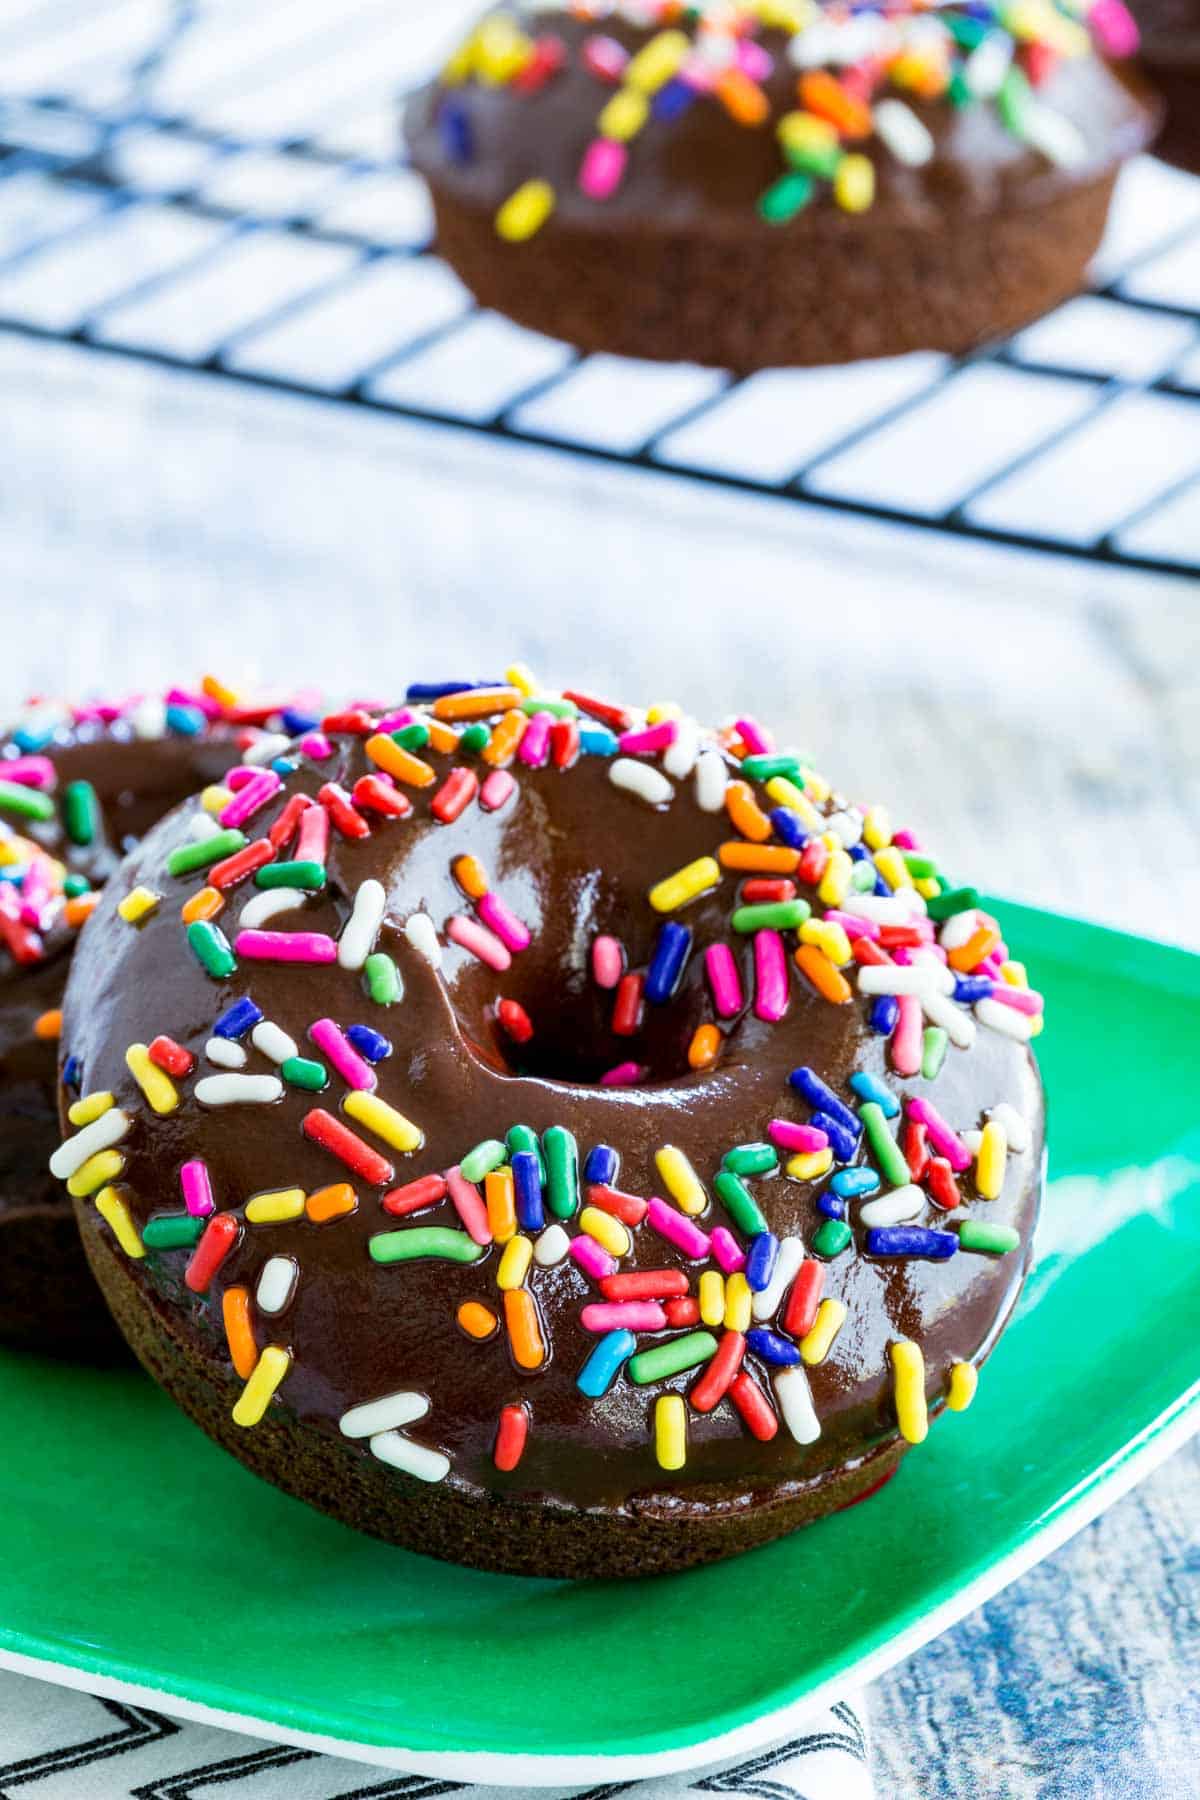 Gluten-free chocolate donuts covered in rainbow sprinkles, on a plate.